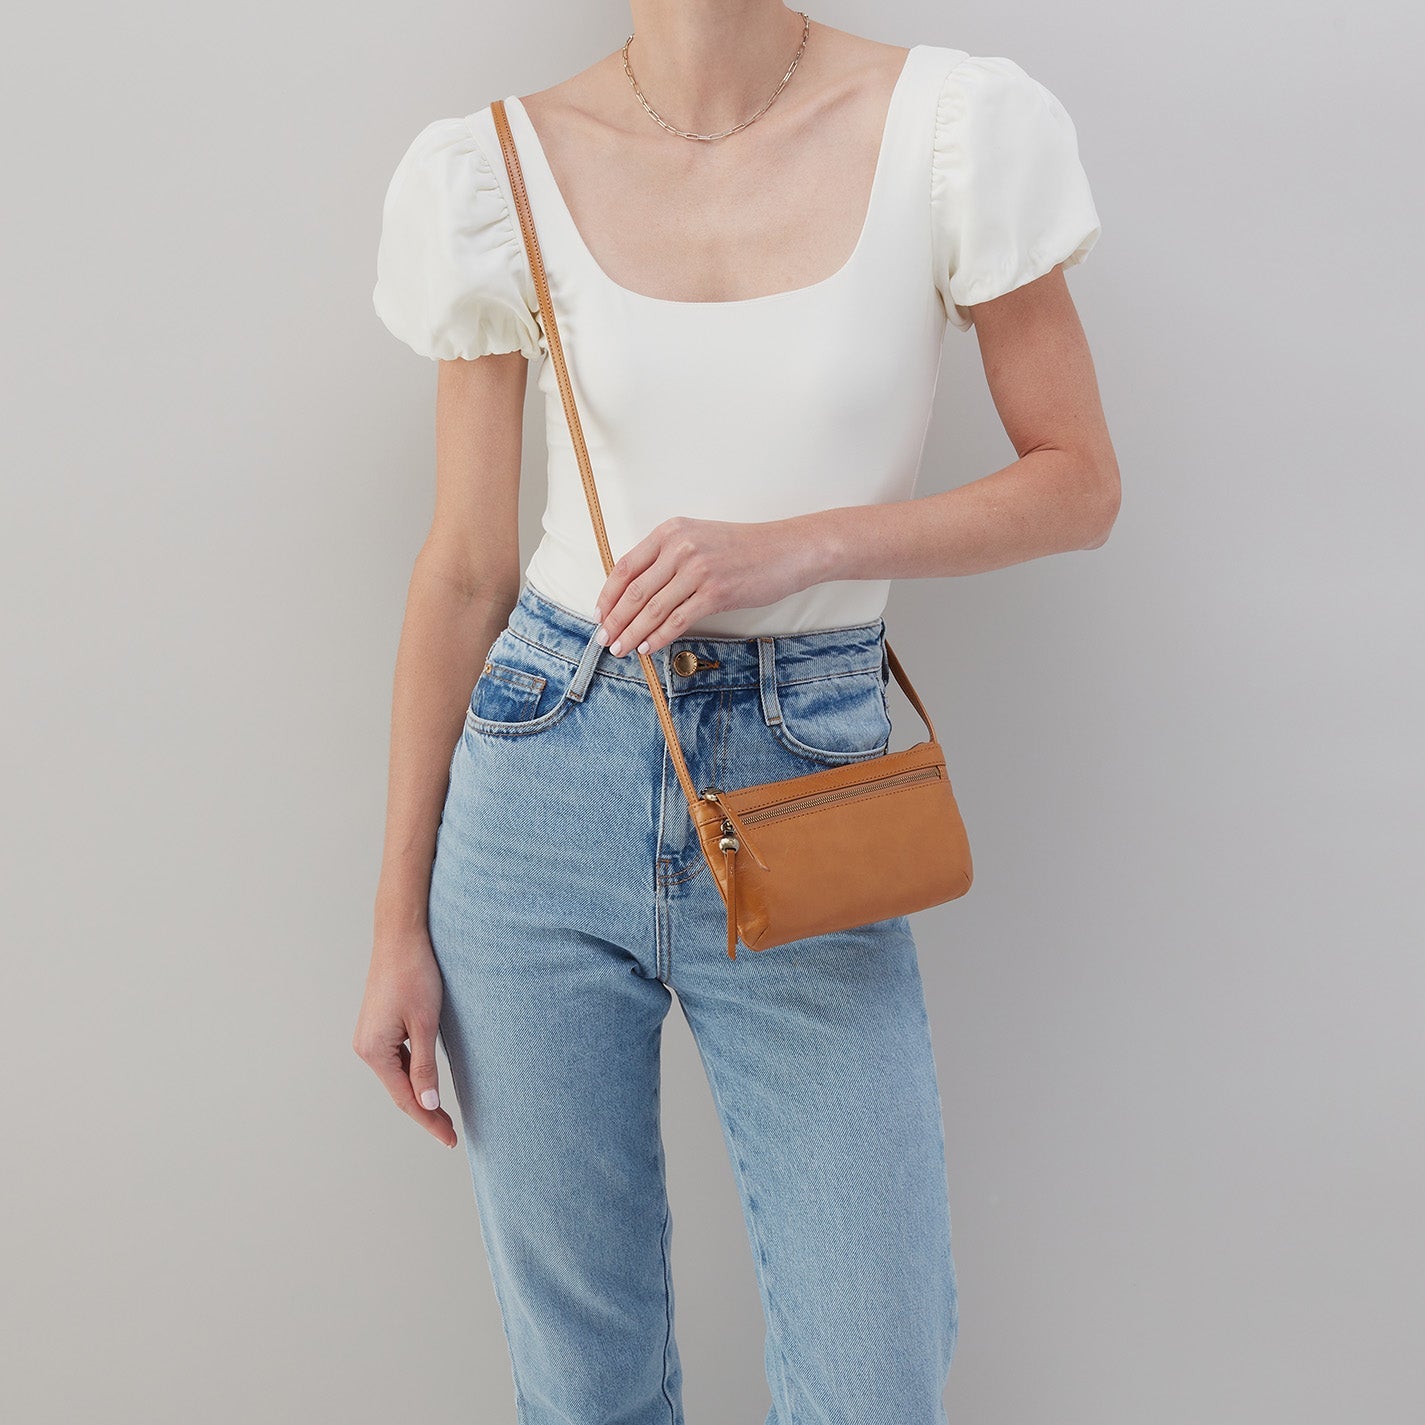 person wearing jeans and a white top with the natural cara crossbody over their shoulder.